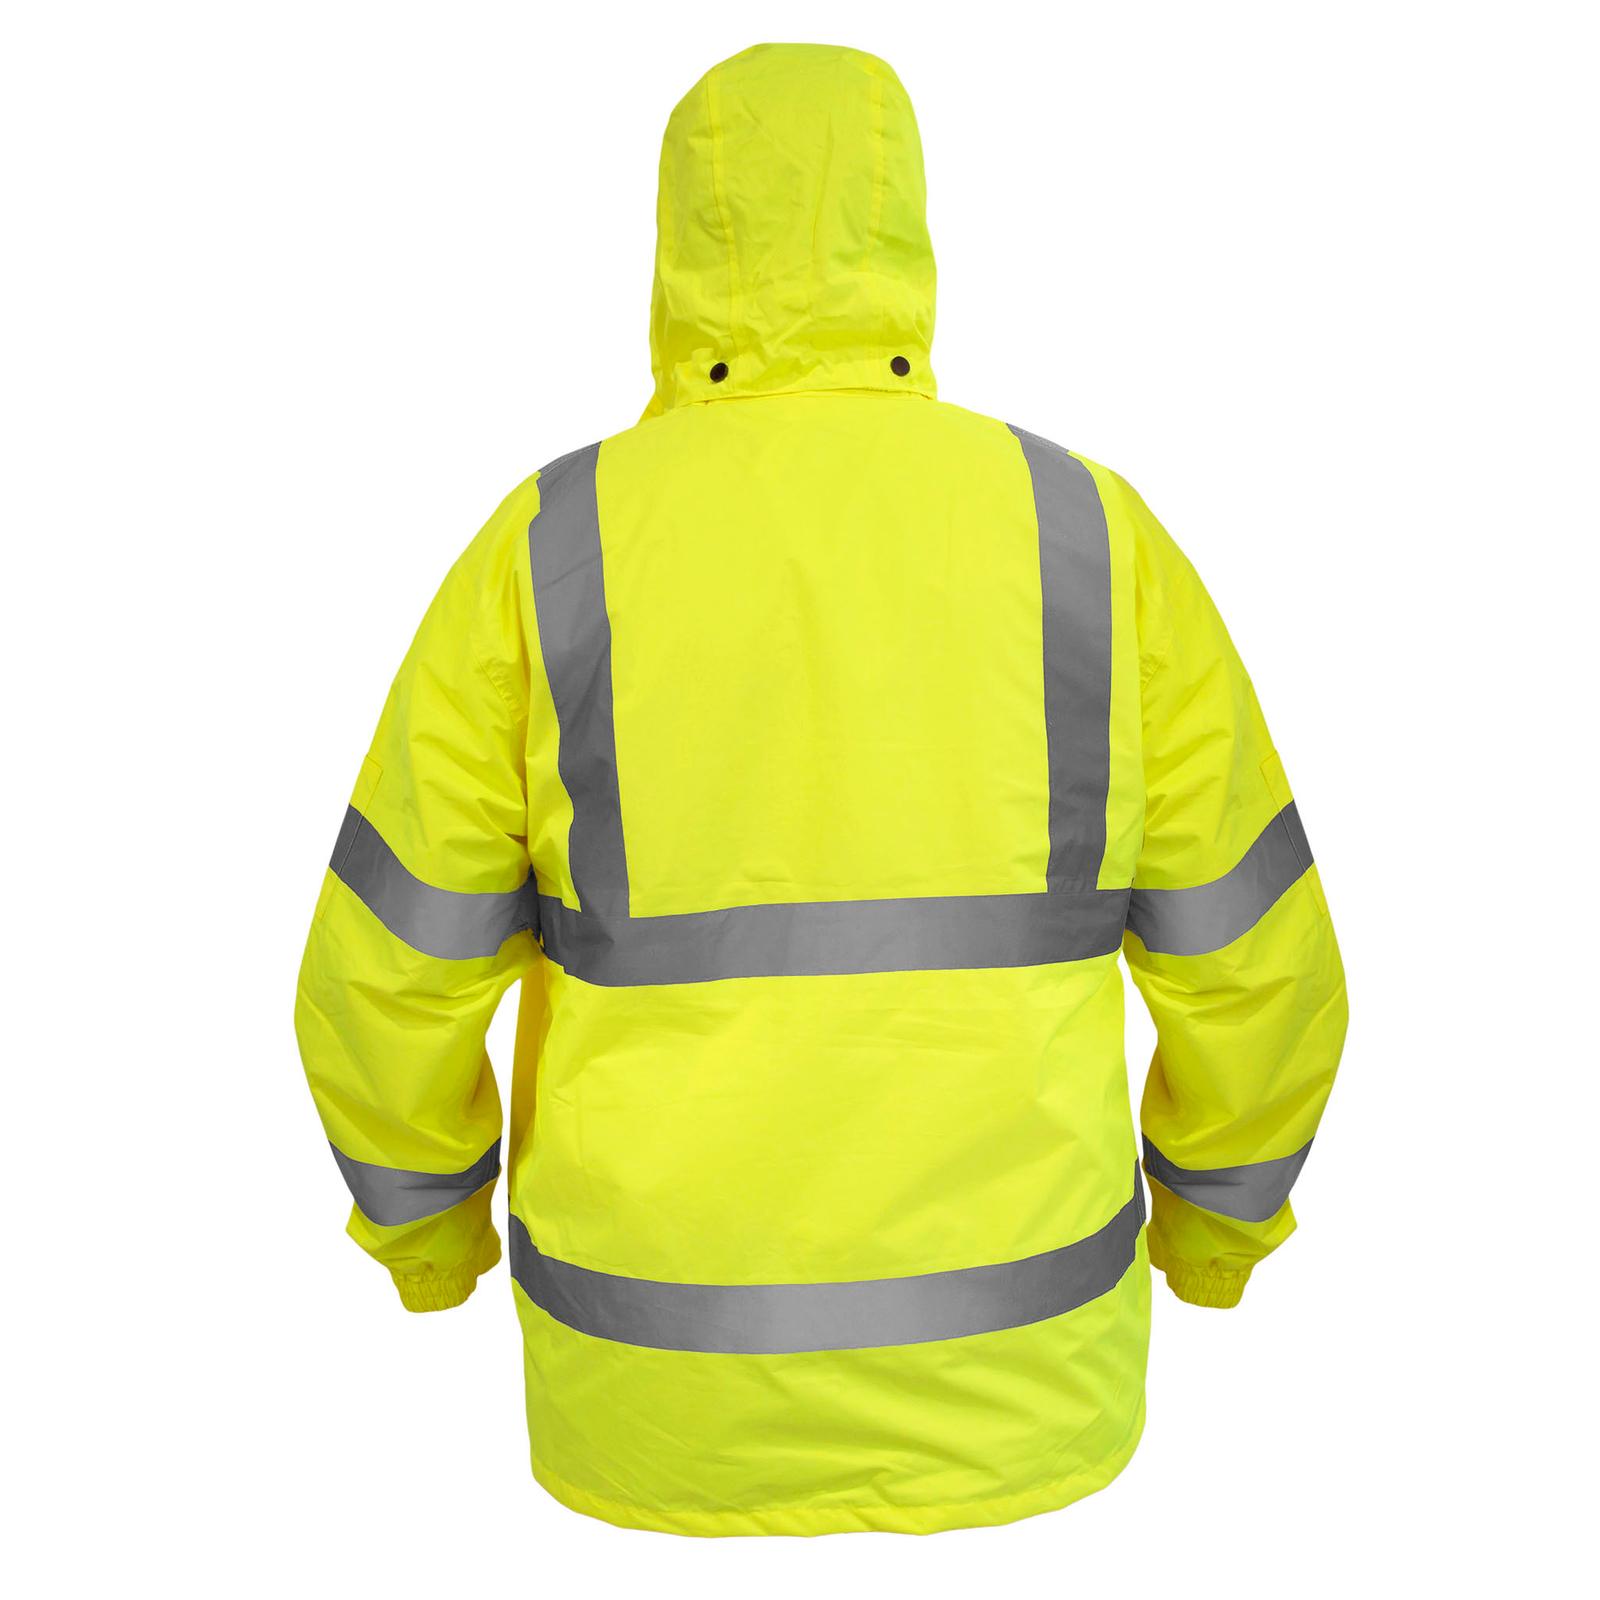 High visibility yellow rain jacket with 2 inches reflective strips and detachable hoodie